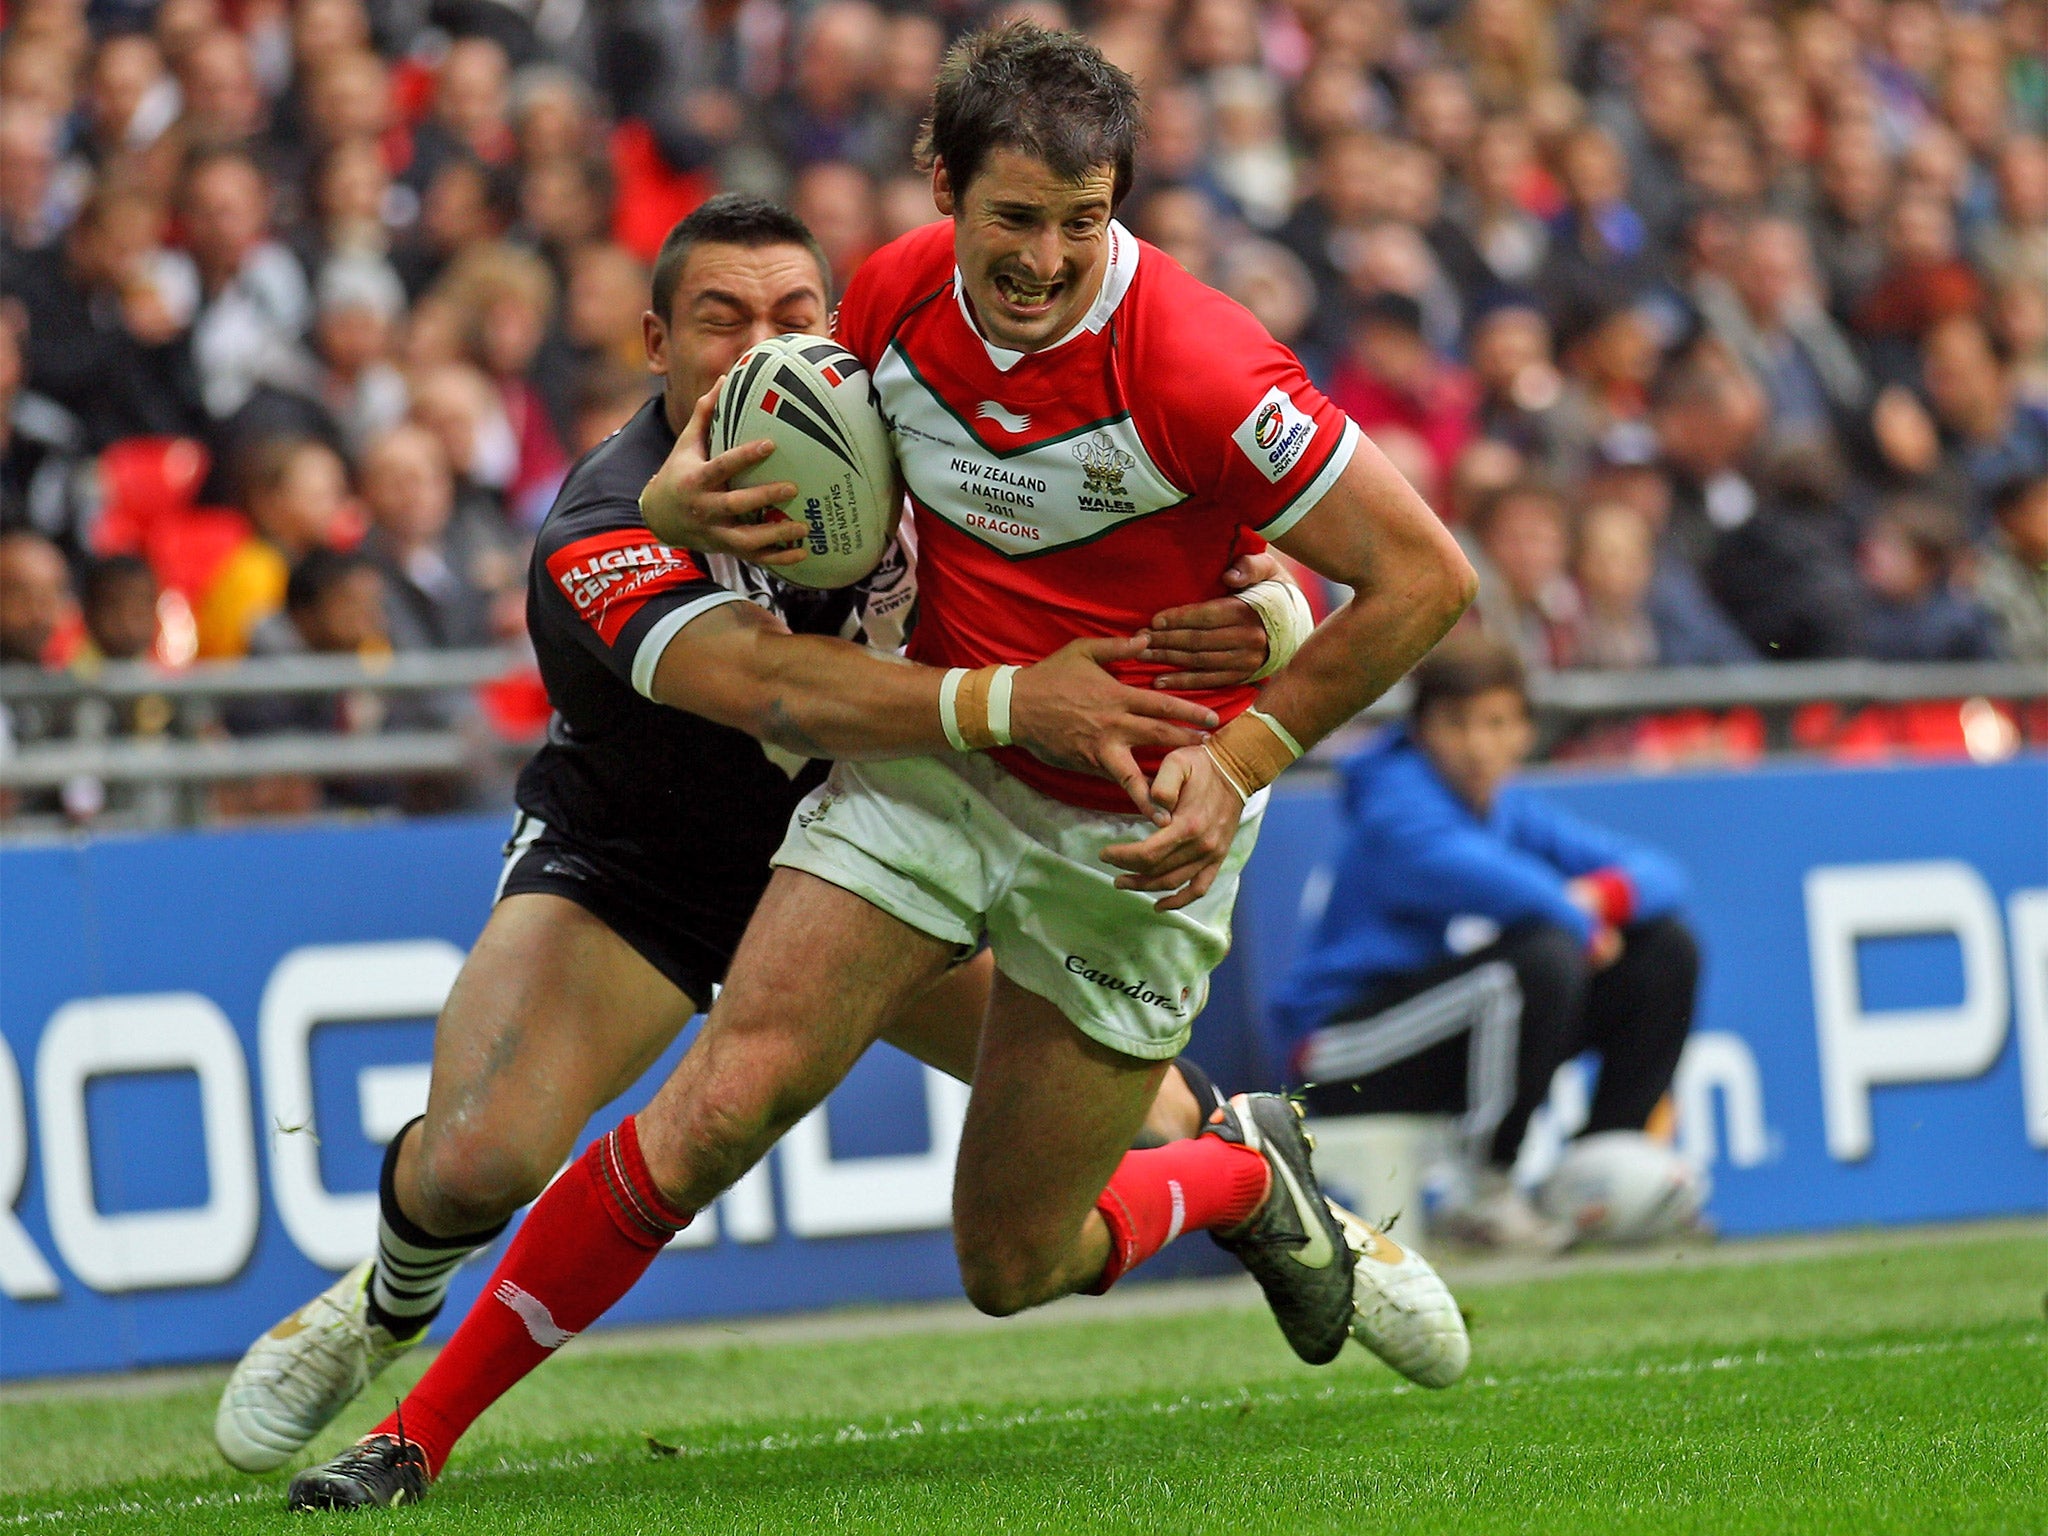 Jones fights off a New Zealand challenge playing for Wales at Wembley in 2011